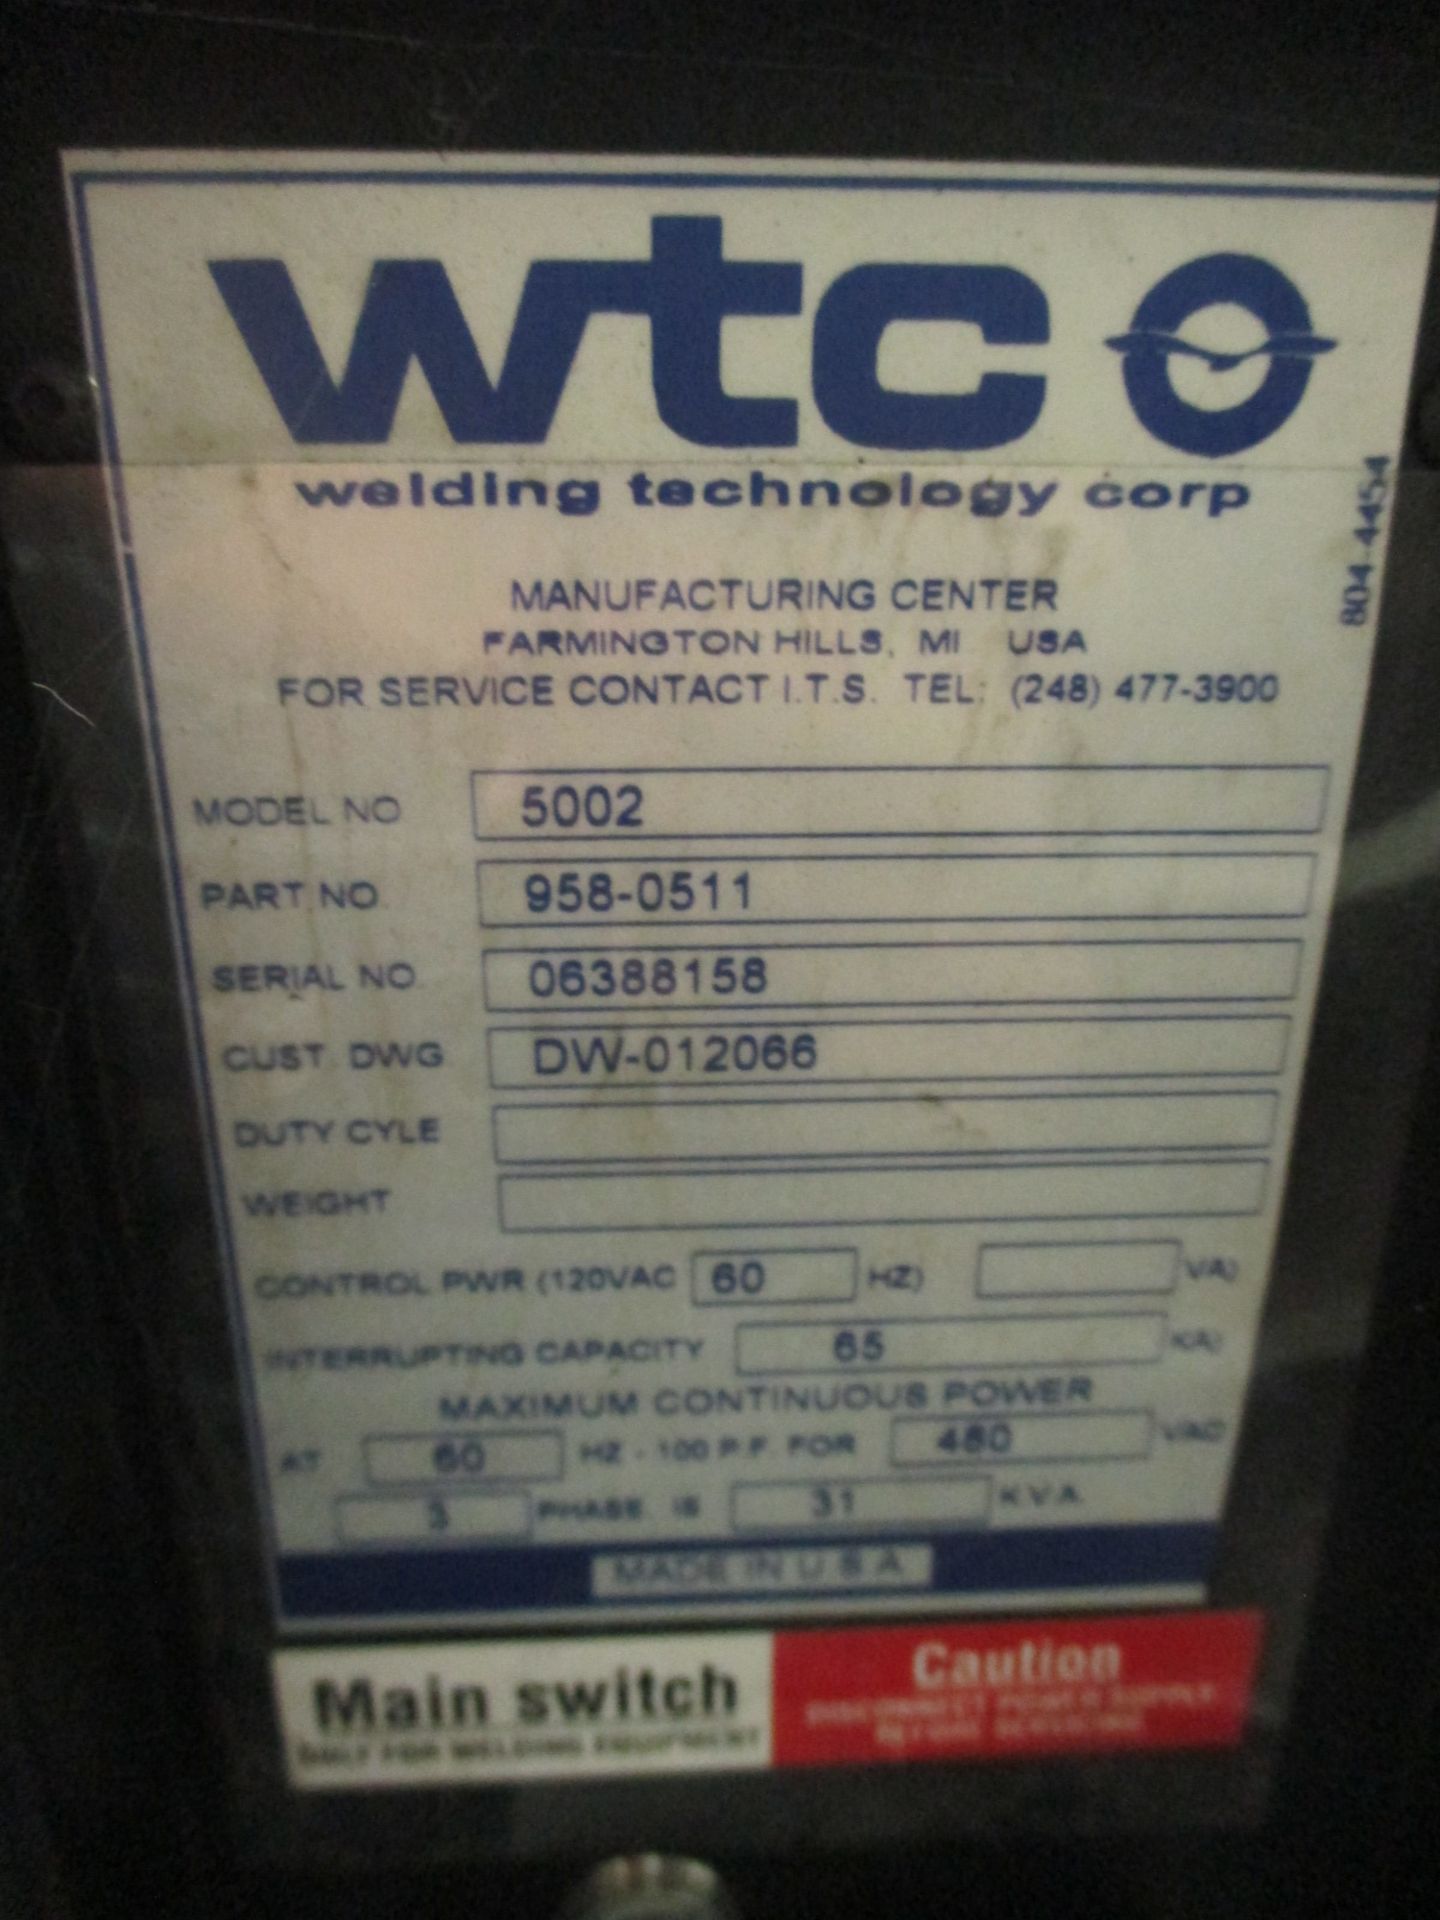 LOT OF 4 WTC MODEL 5002 AIR COOLED WELD CONTROLLERS, 350 AMP, LOCATION MI, BUYER TO SHIP - Image 4 of 4